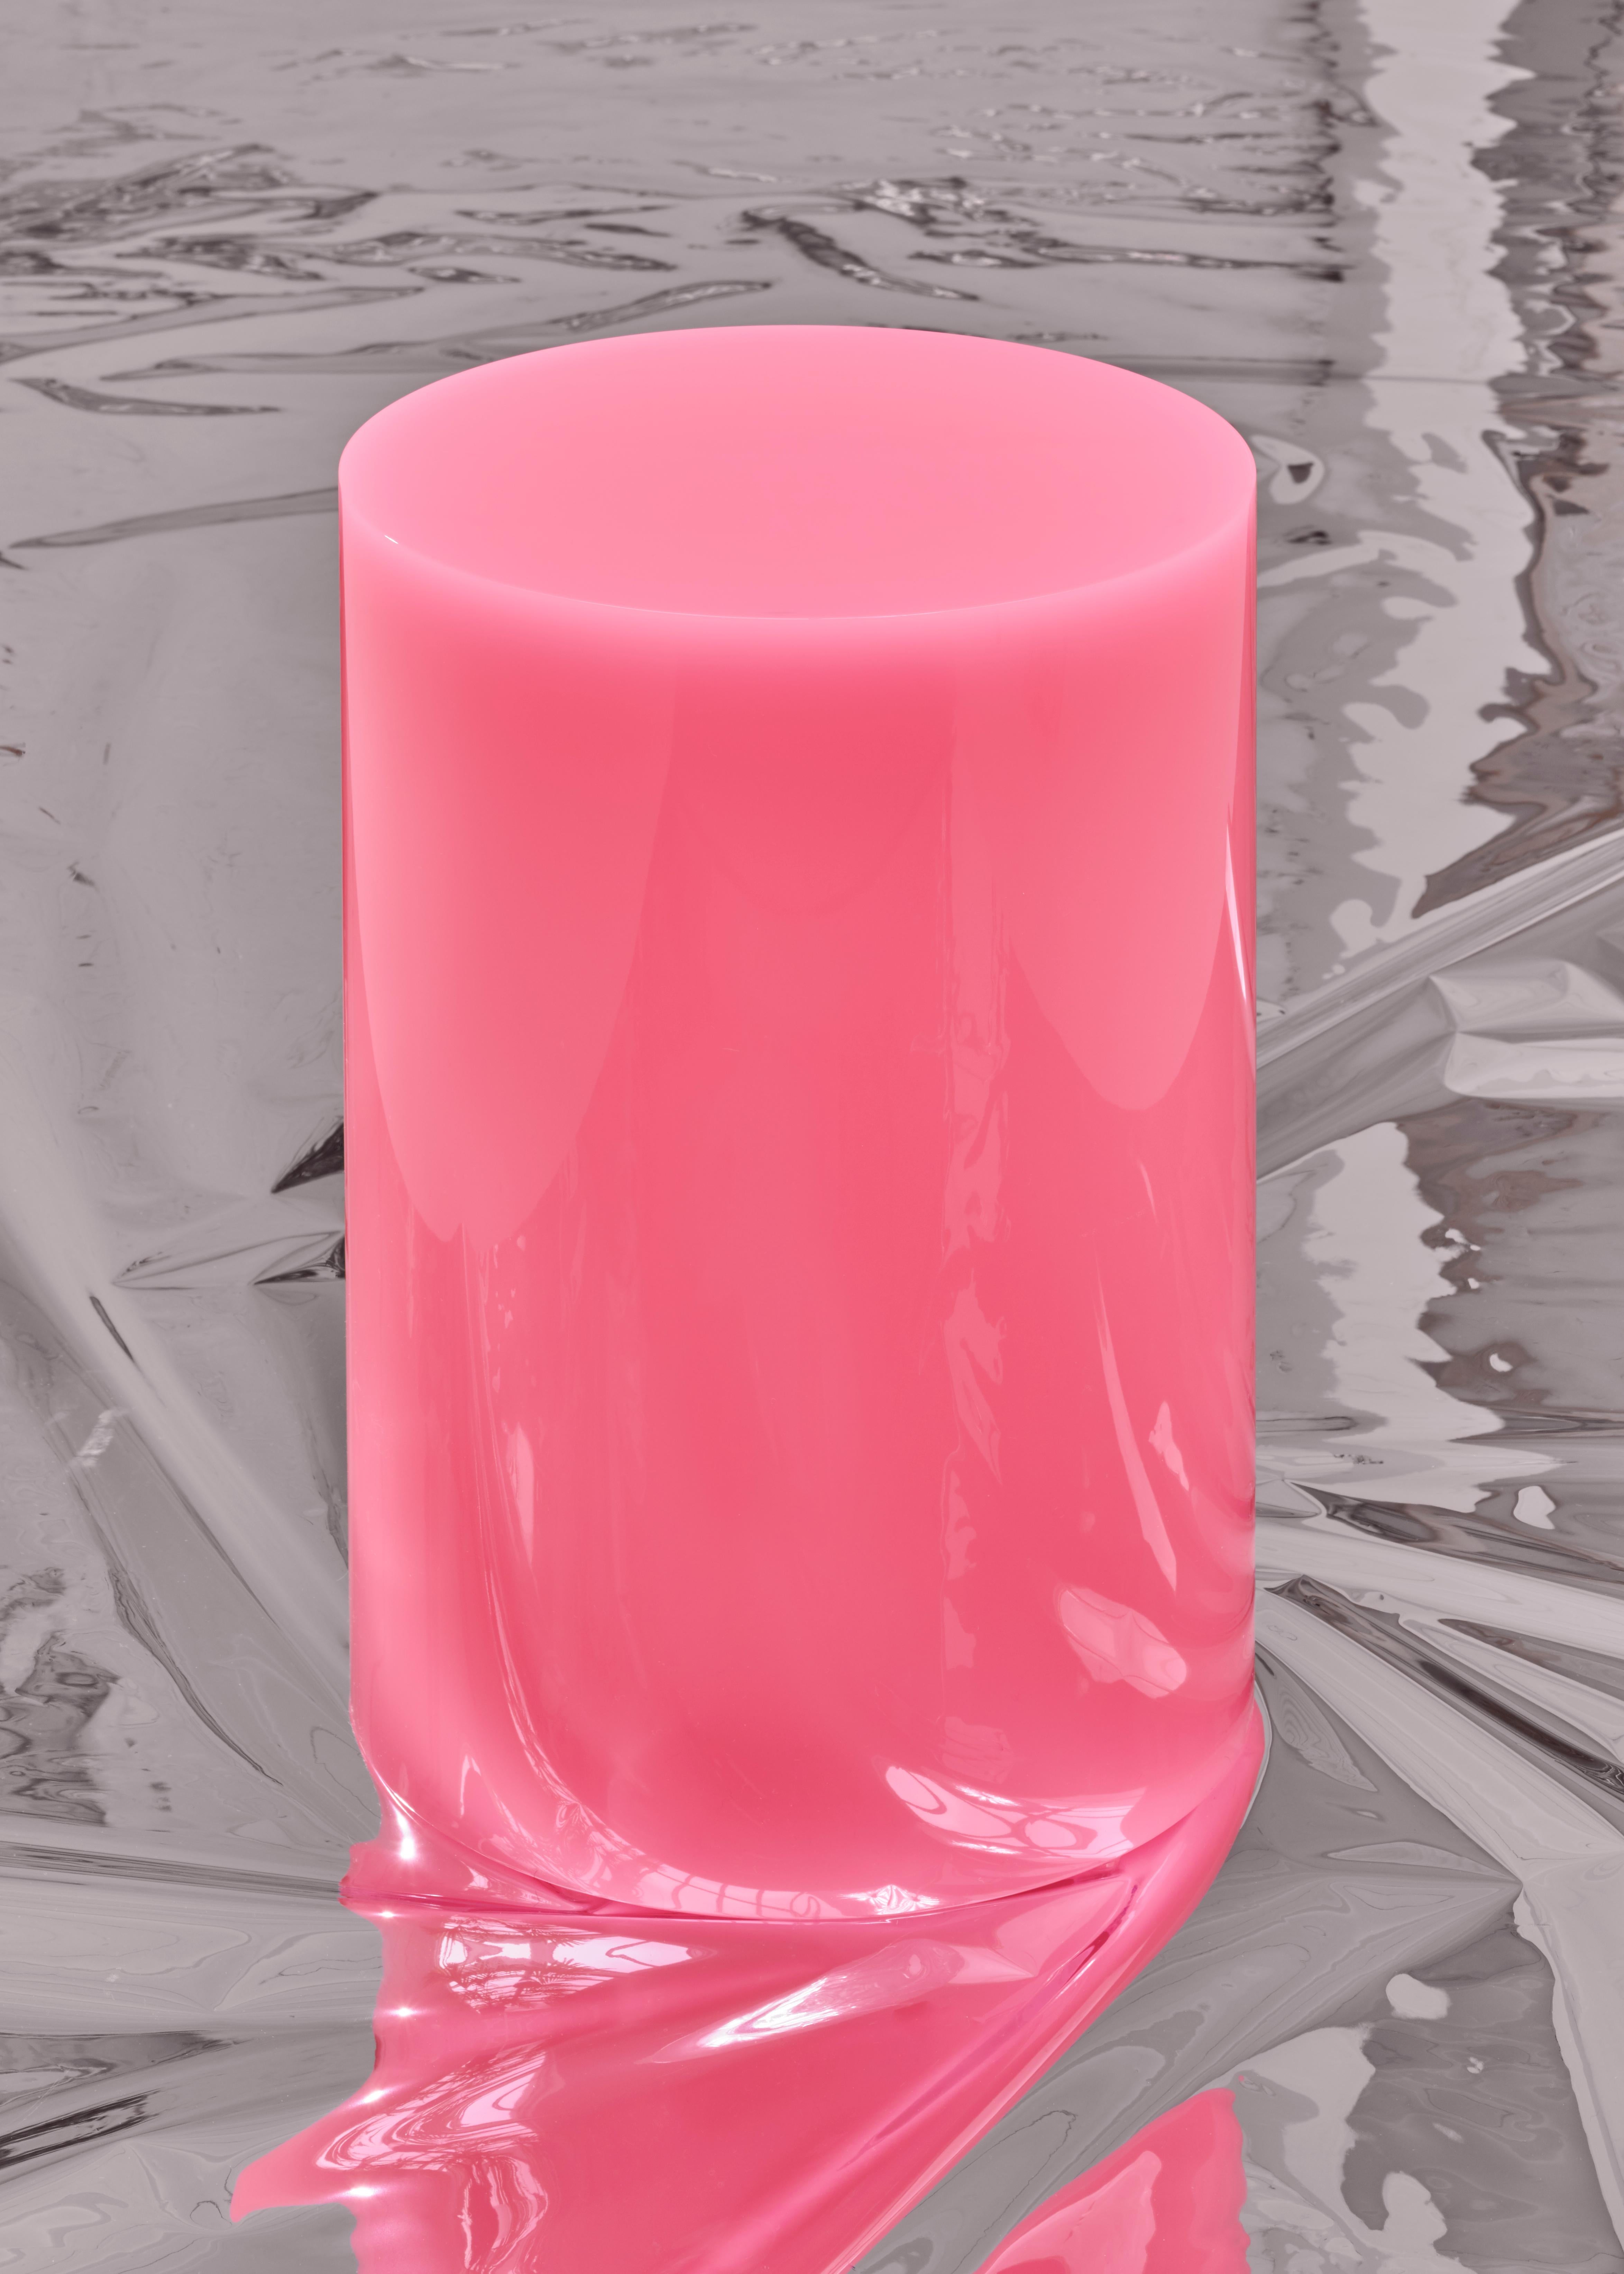 Post-Modern Contemporary Candy Column Stool / Side Table by Sabine Marcelis, Polished Resin For Sale